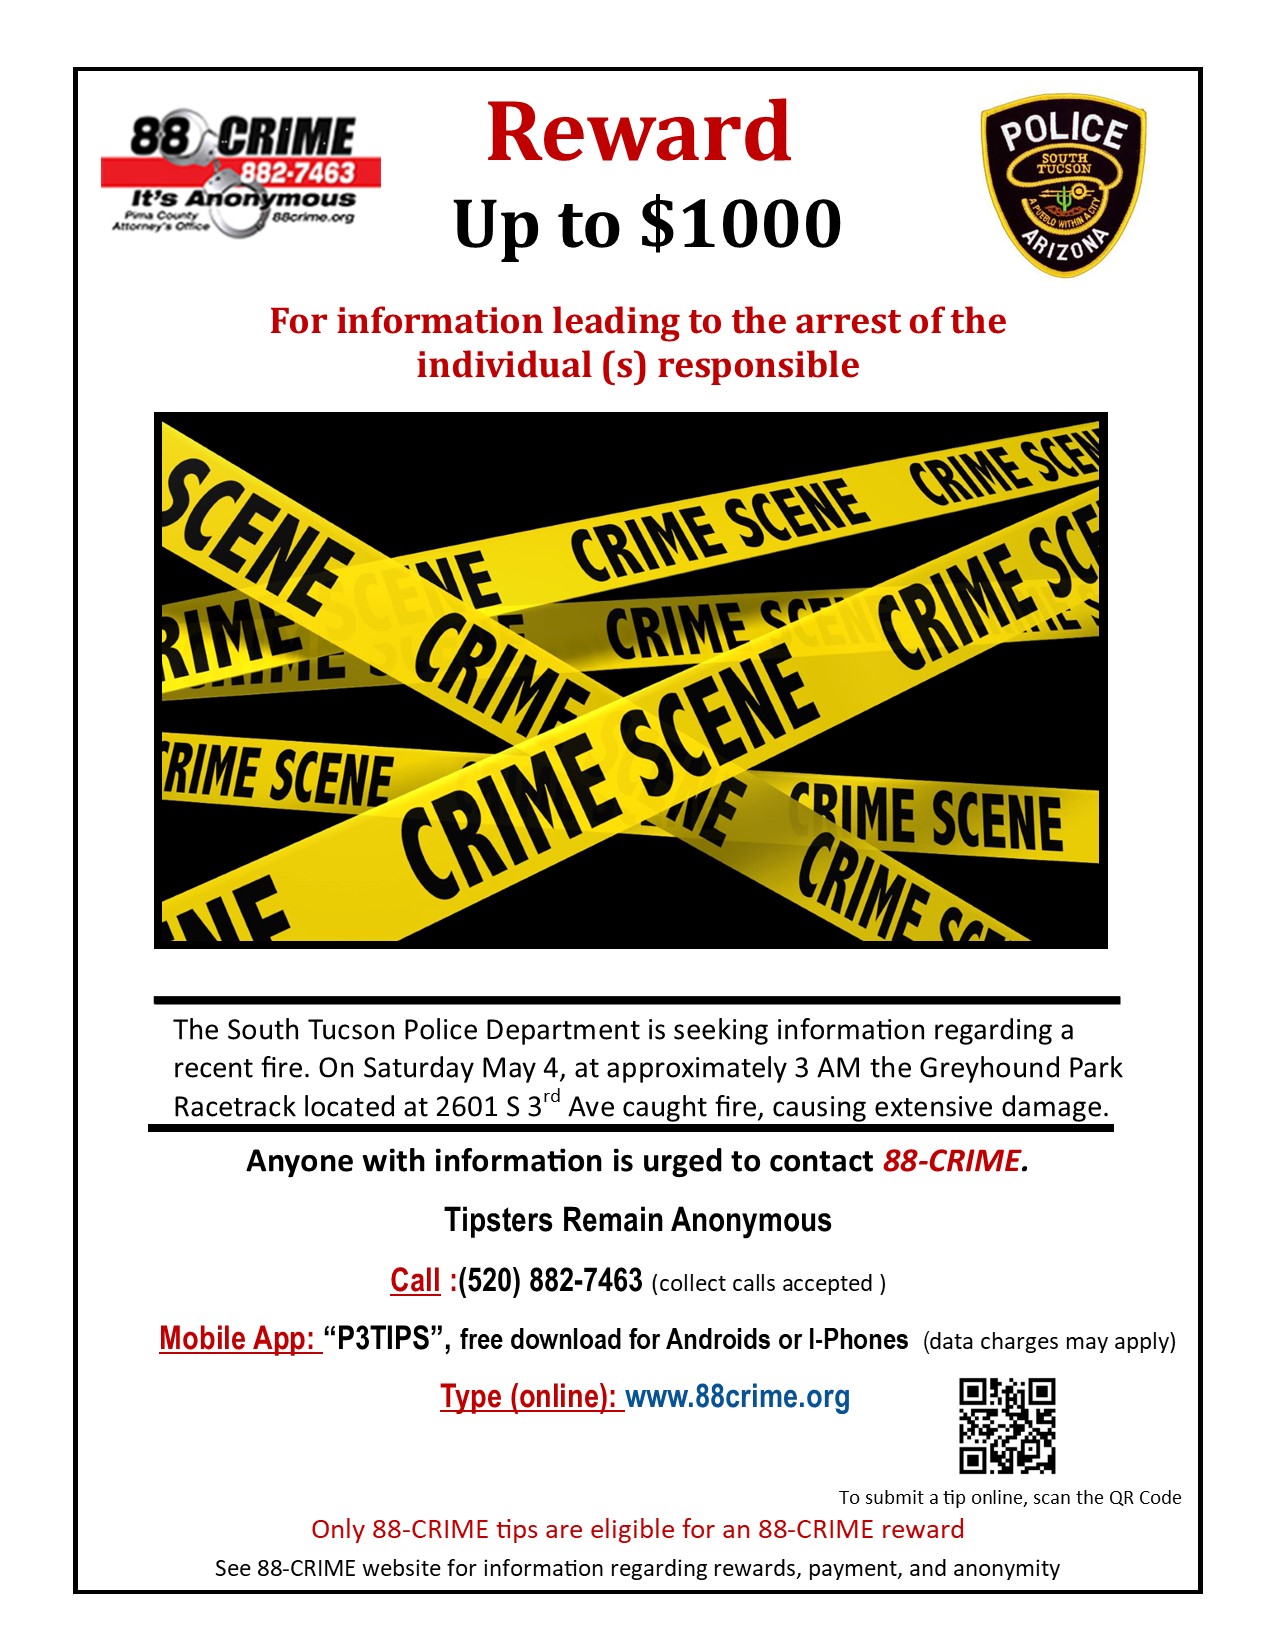 South Tucson Police Department – Fire